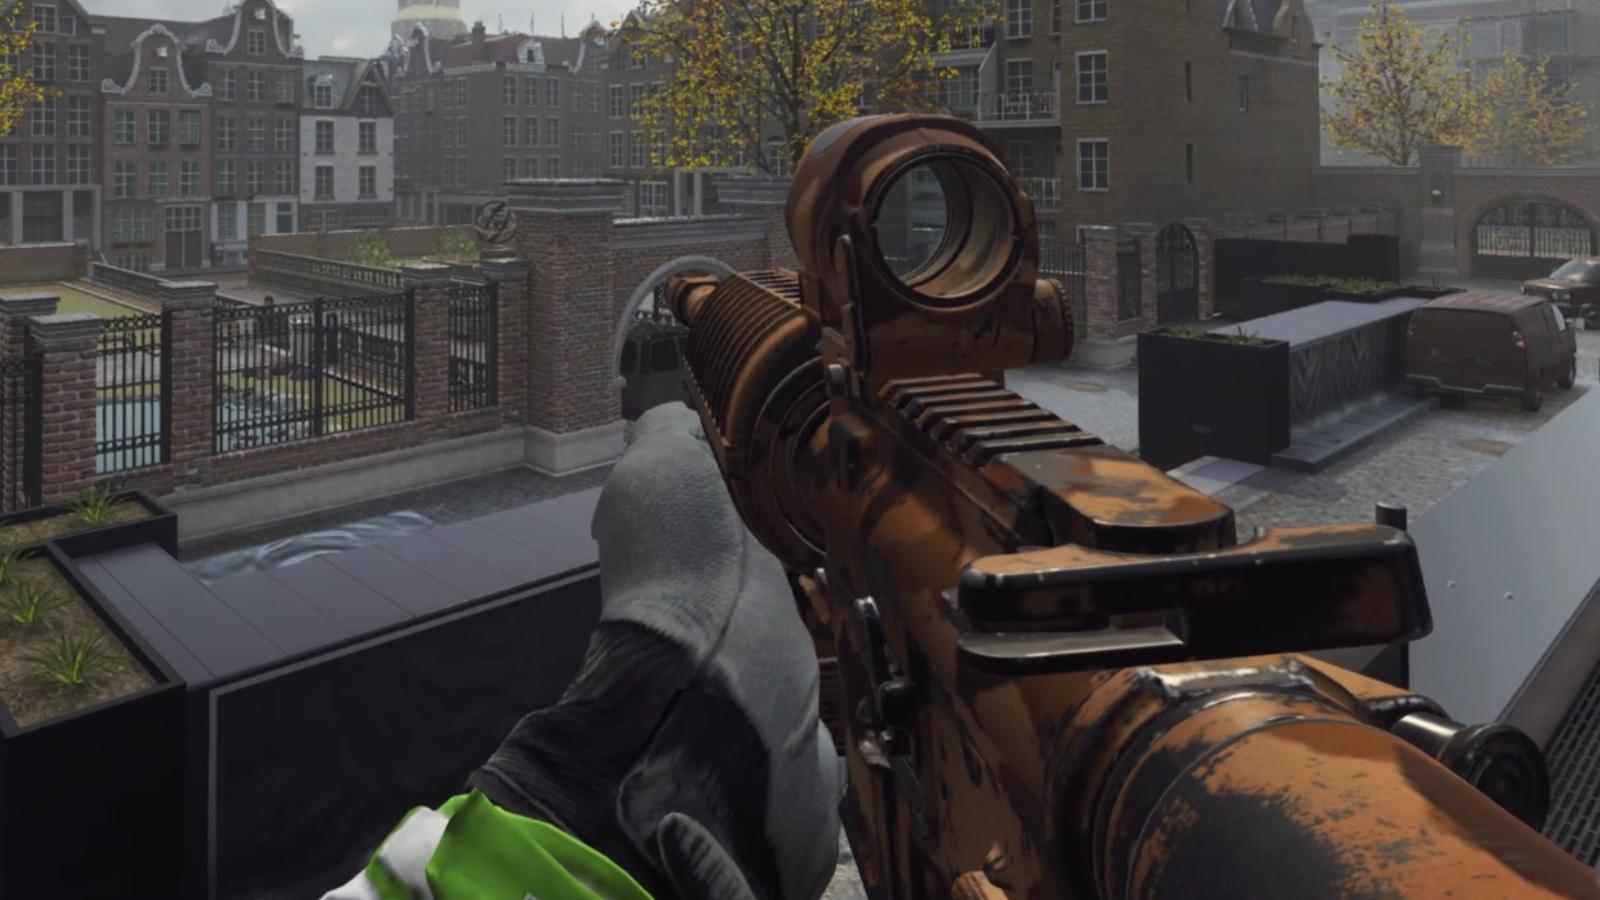 cod mw2 multiplayer using salty is a dog's m16 loadout on Breenbergh Hotel.